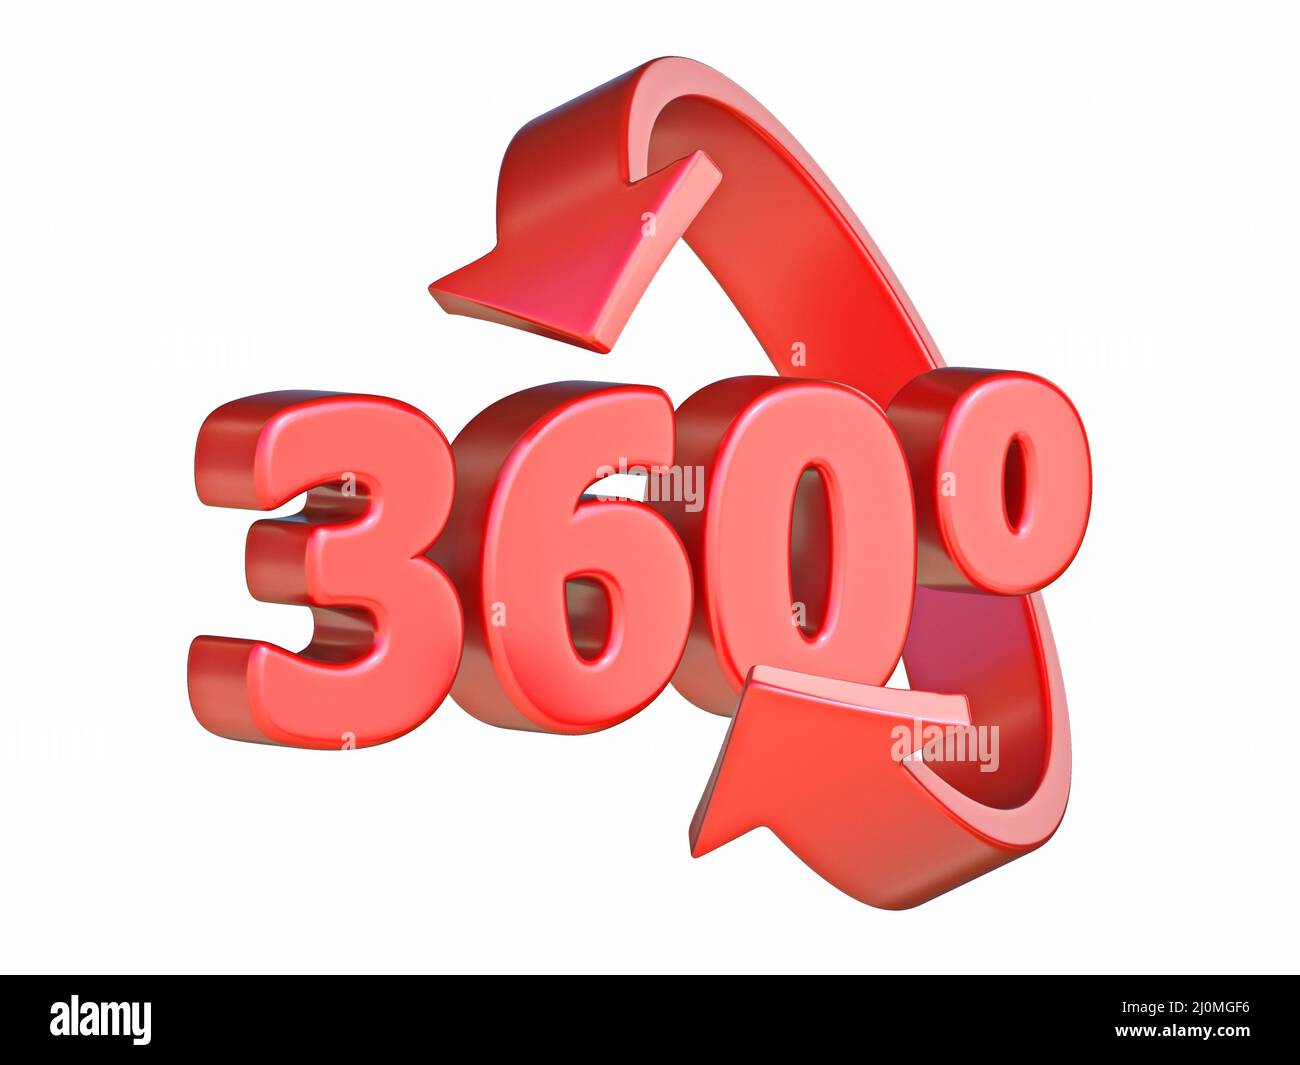 Red 360 degree rotation icon 3D Stock Photo